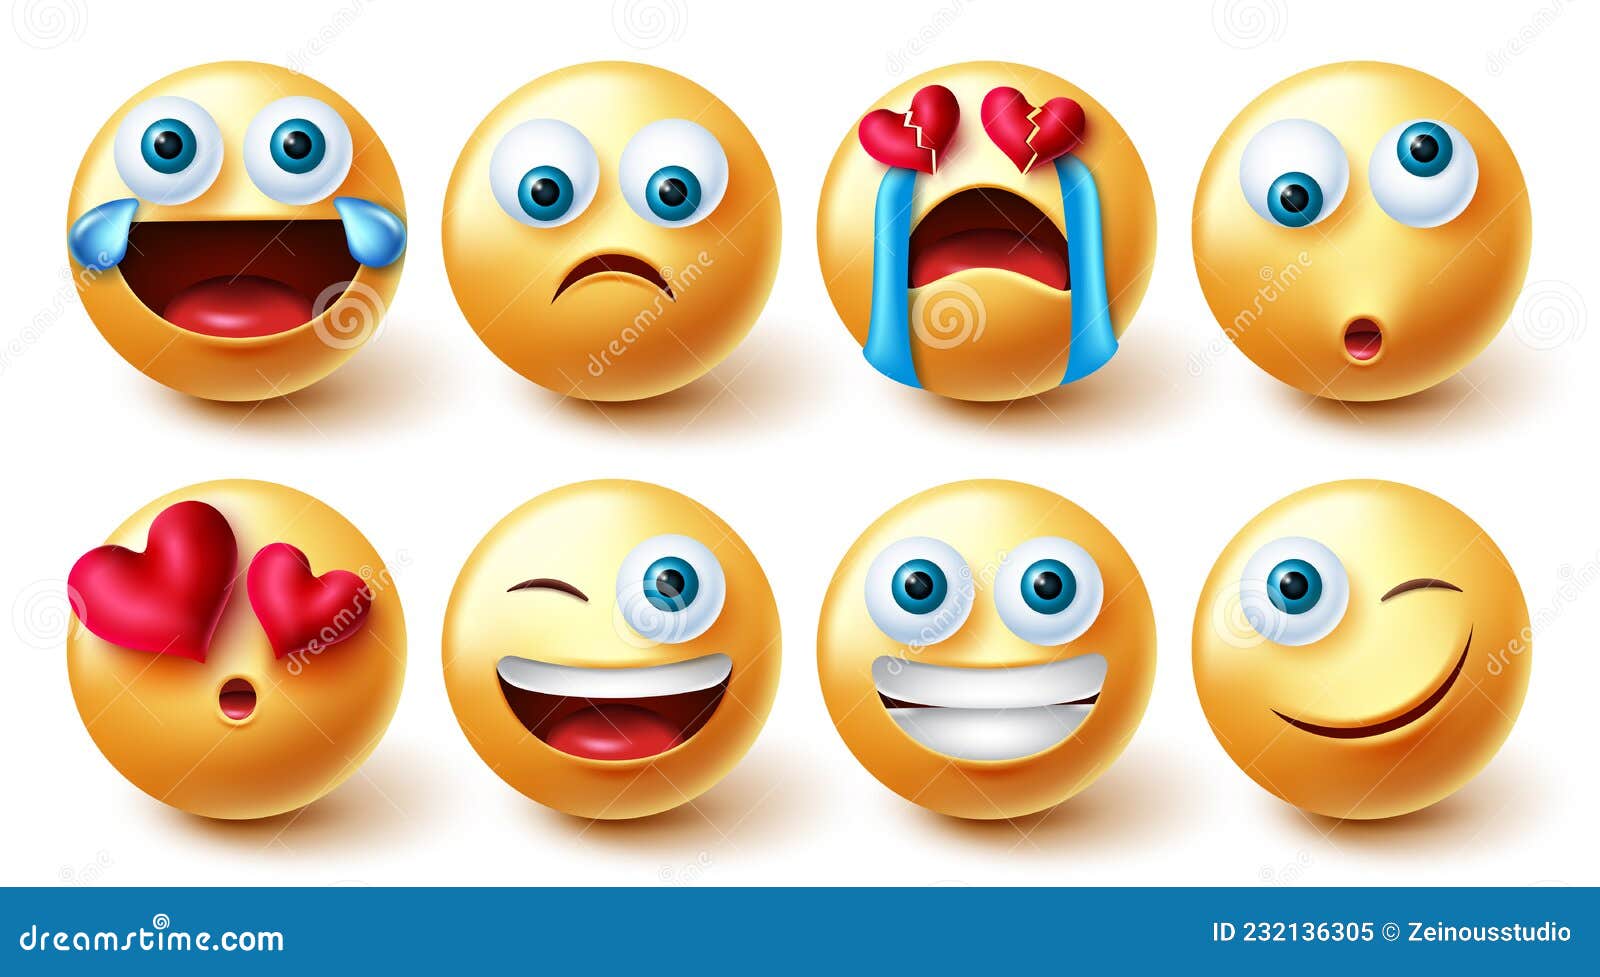 smileys emoji  set. smiley emoticons graphic 3d  in funny, cute and sad broken hearted face emotions for emojis.